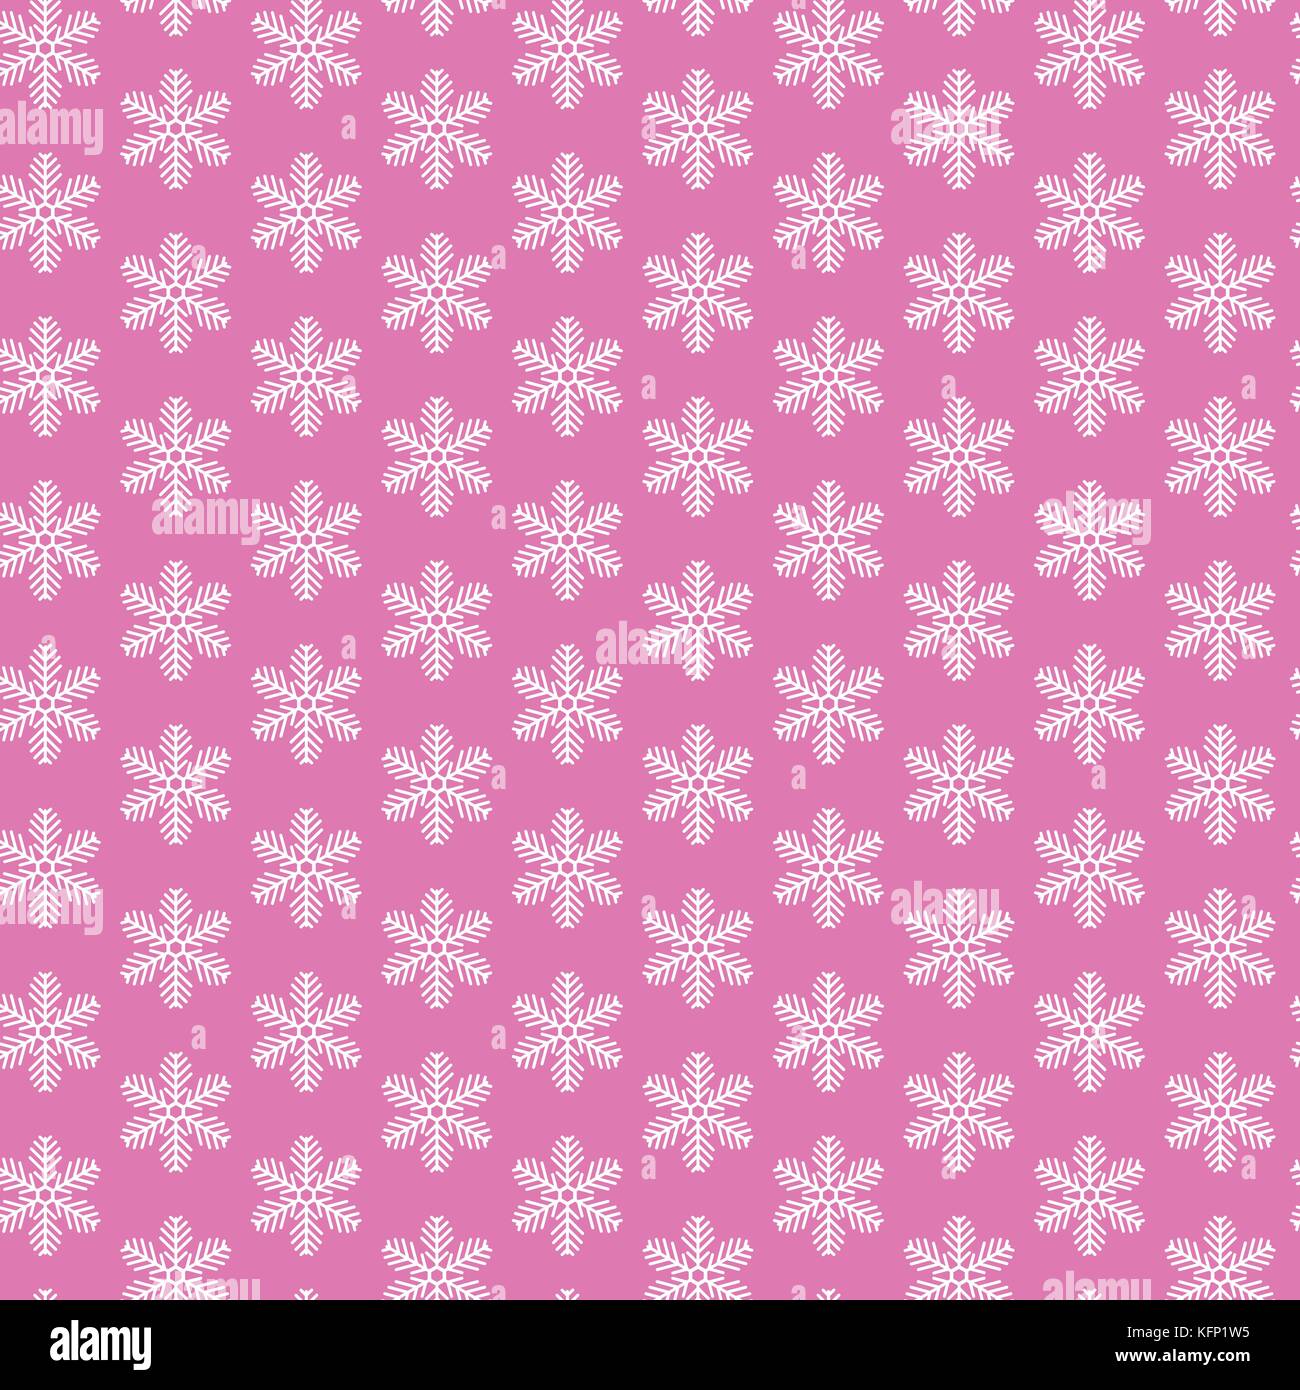 Christmas New Year seamless pattern with snowflakes. Holiday background. Snowflakes. Xmas winter trendy decoration. Festive texture. Hand drawn vector Stock Vector